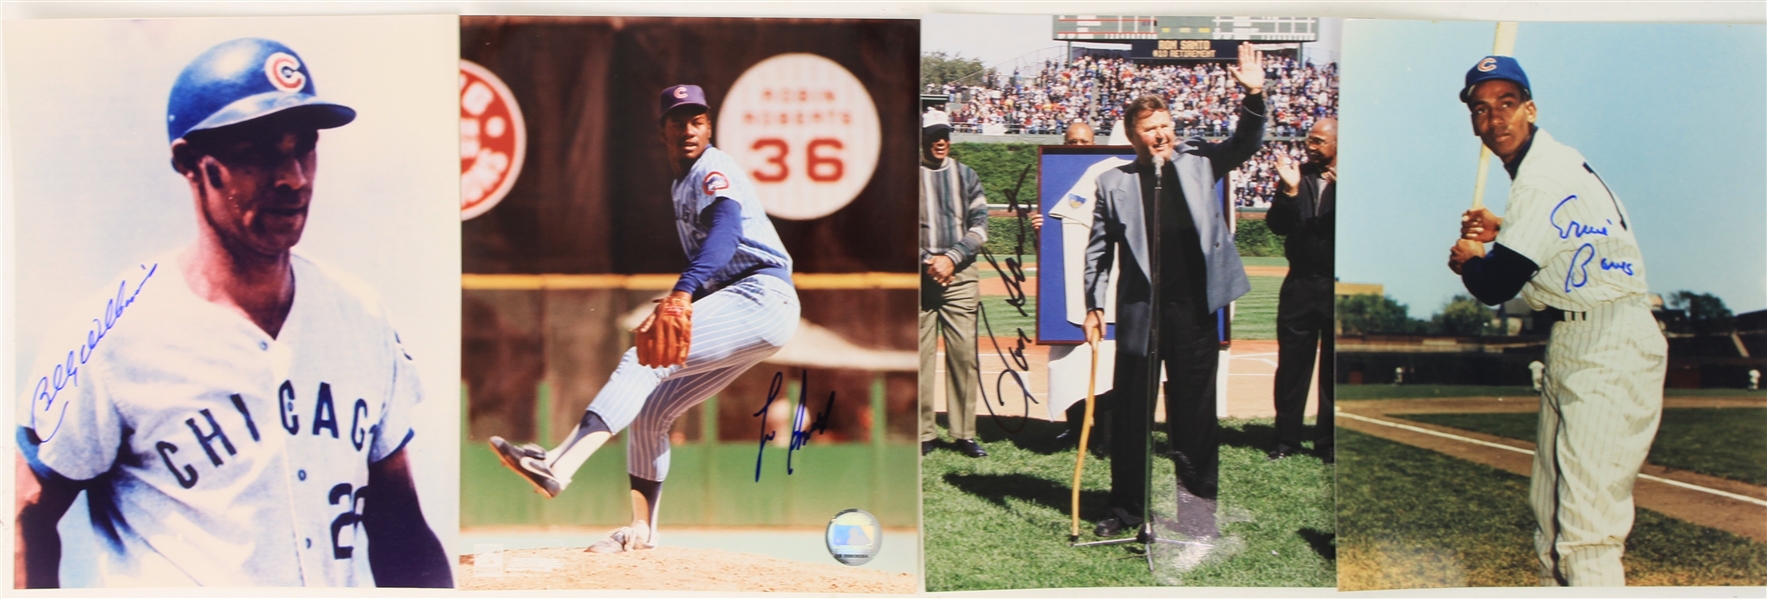 1970s-2000s Chicago Cubs Signed 8" x 10" Photos - Lot of 4 w/ Ernie Banks, Ron Santo, Fergie Jenkins & Billy Williams (JSA)